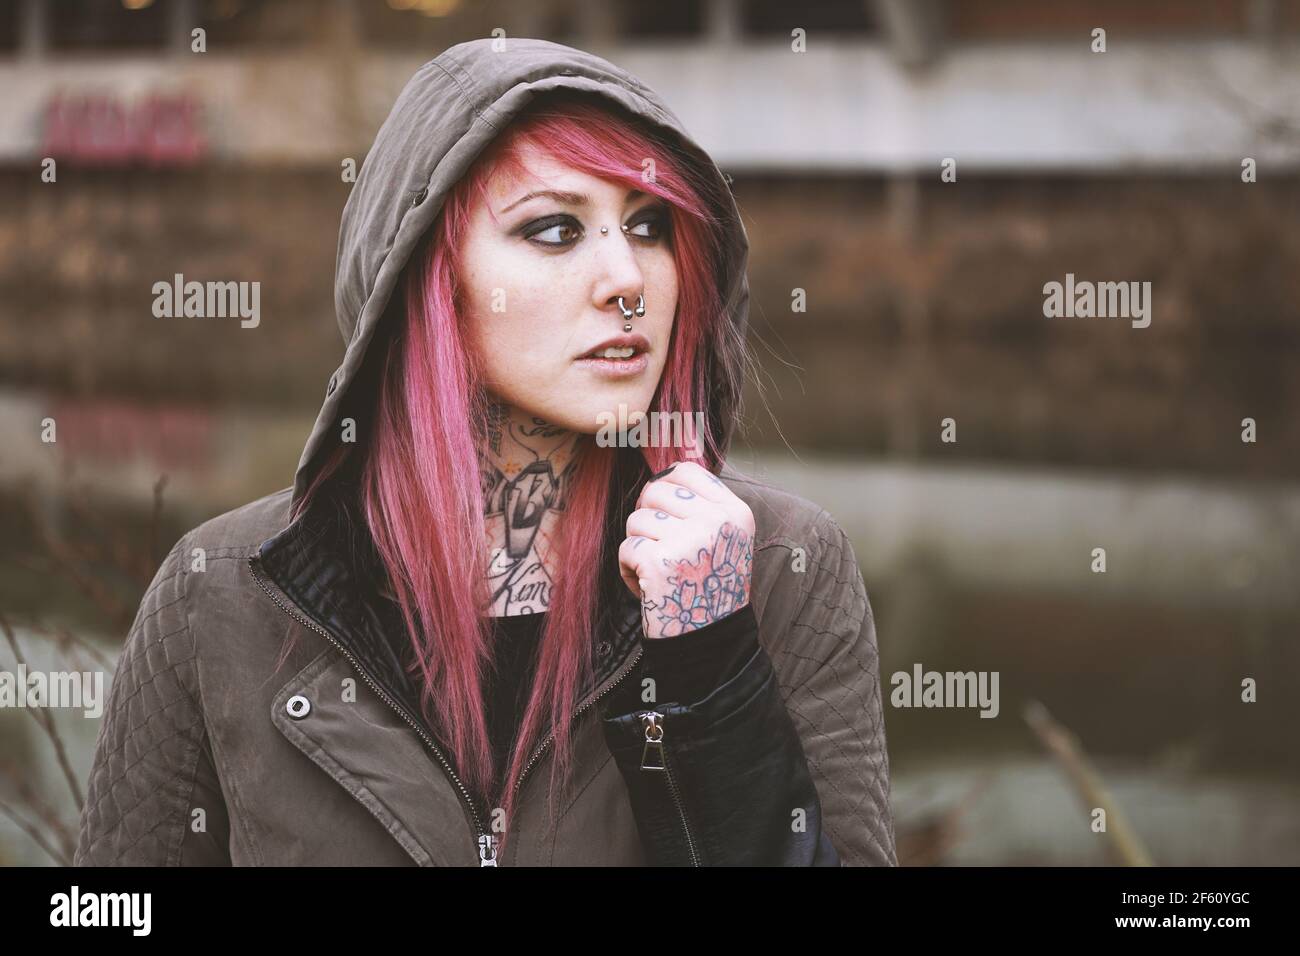 thoughtful portrait of young woman with piercings and tattoos Stock Photo